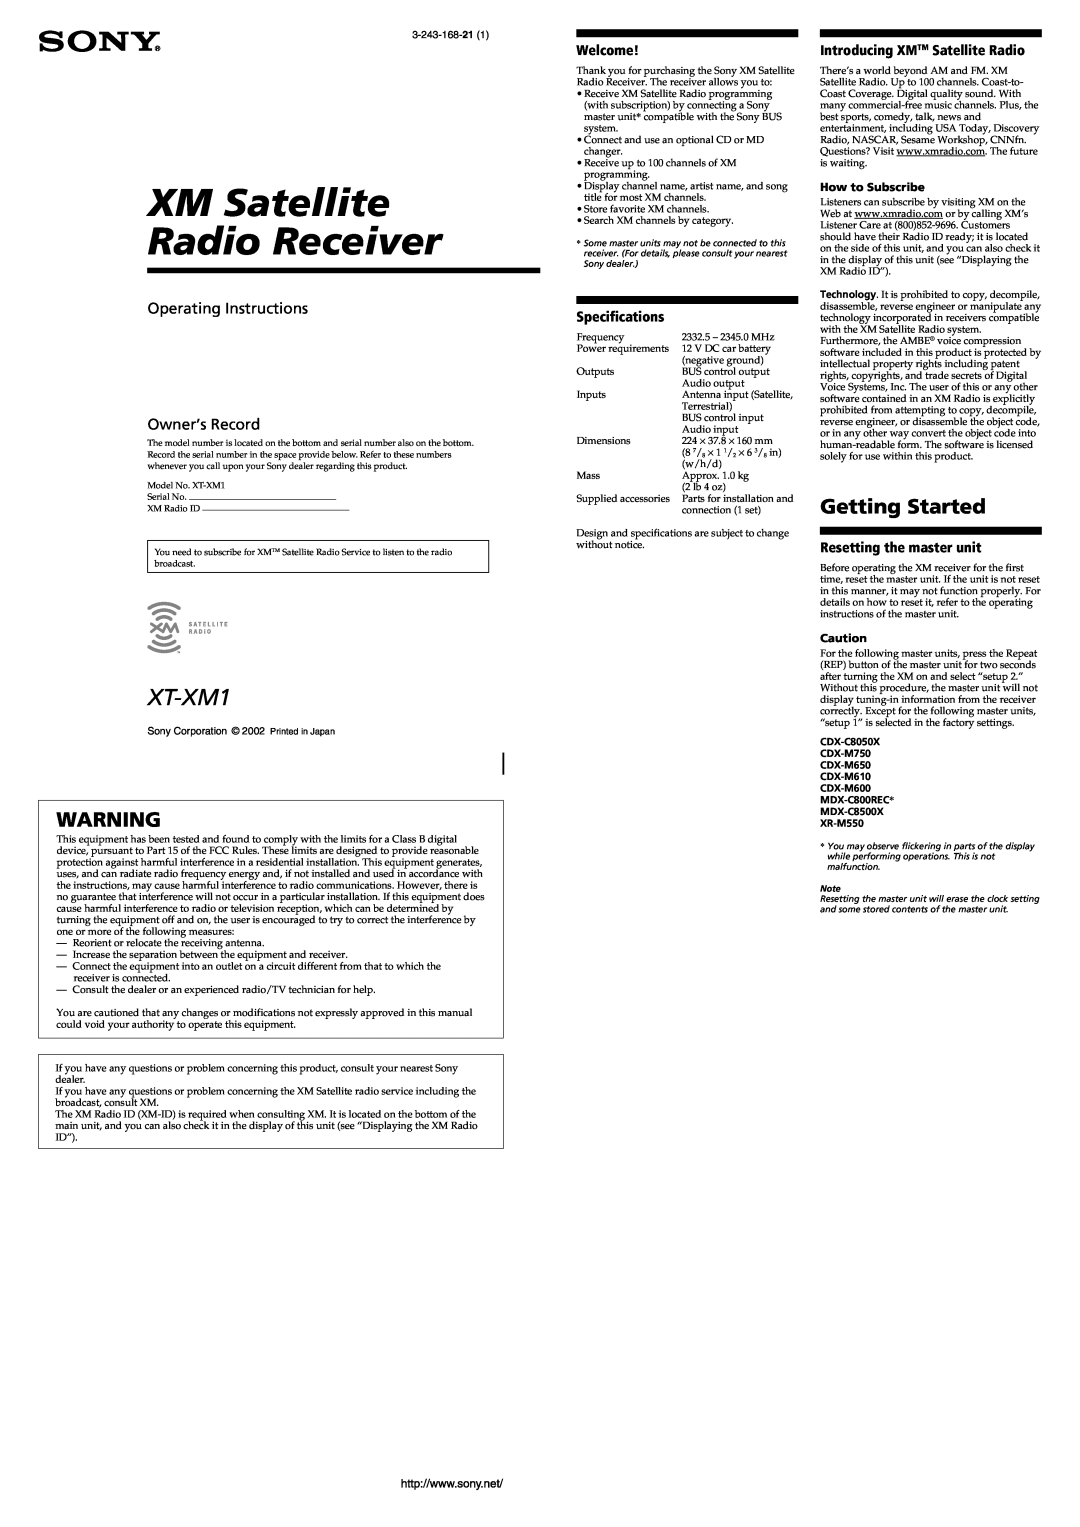 Sony XT-XM1 specifications Getting Started, XM Satellite Radio Receiver, Operating Instructions Owner’s Record 